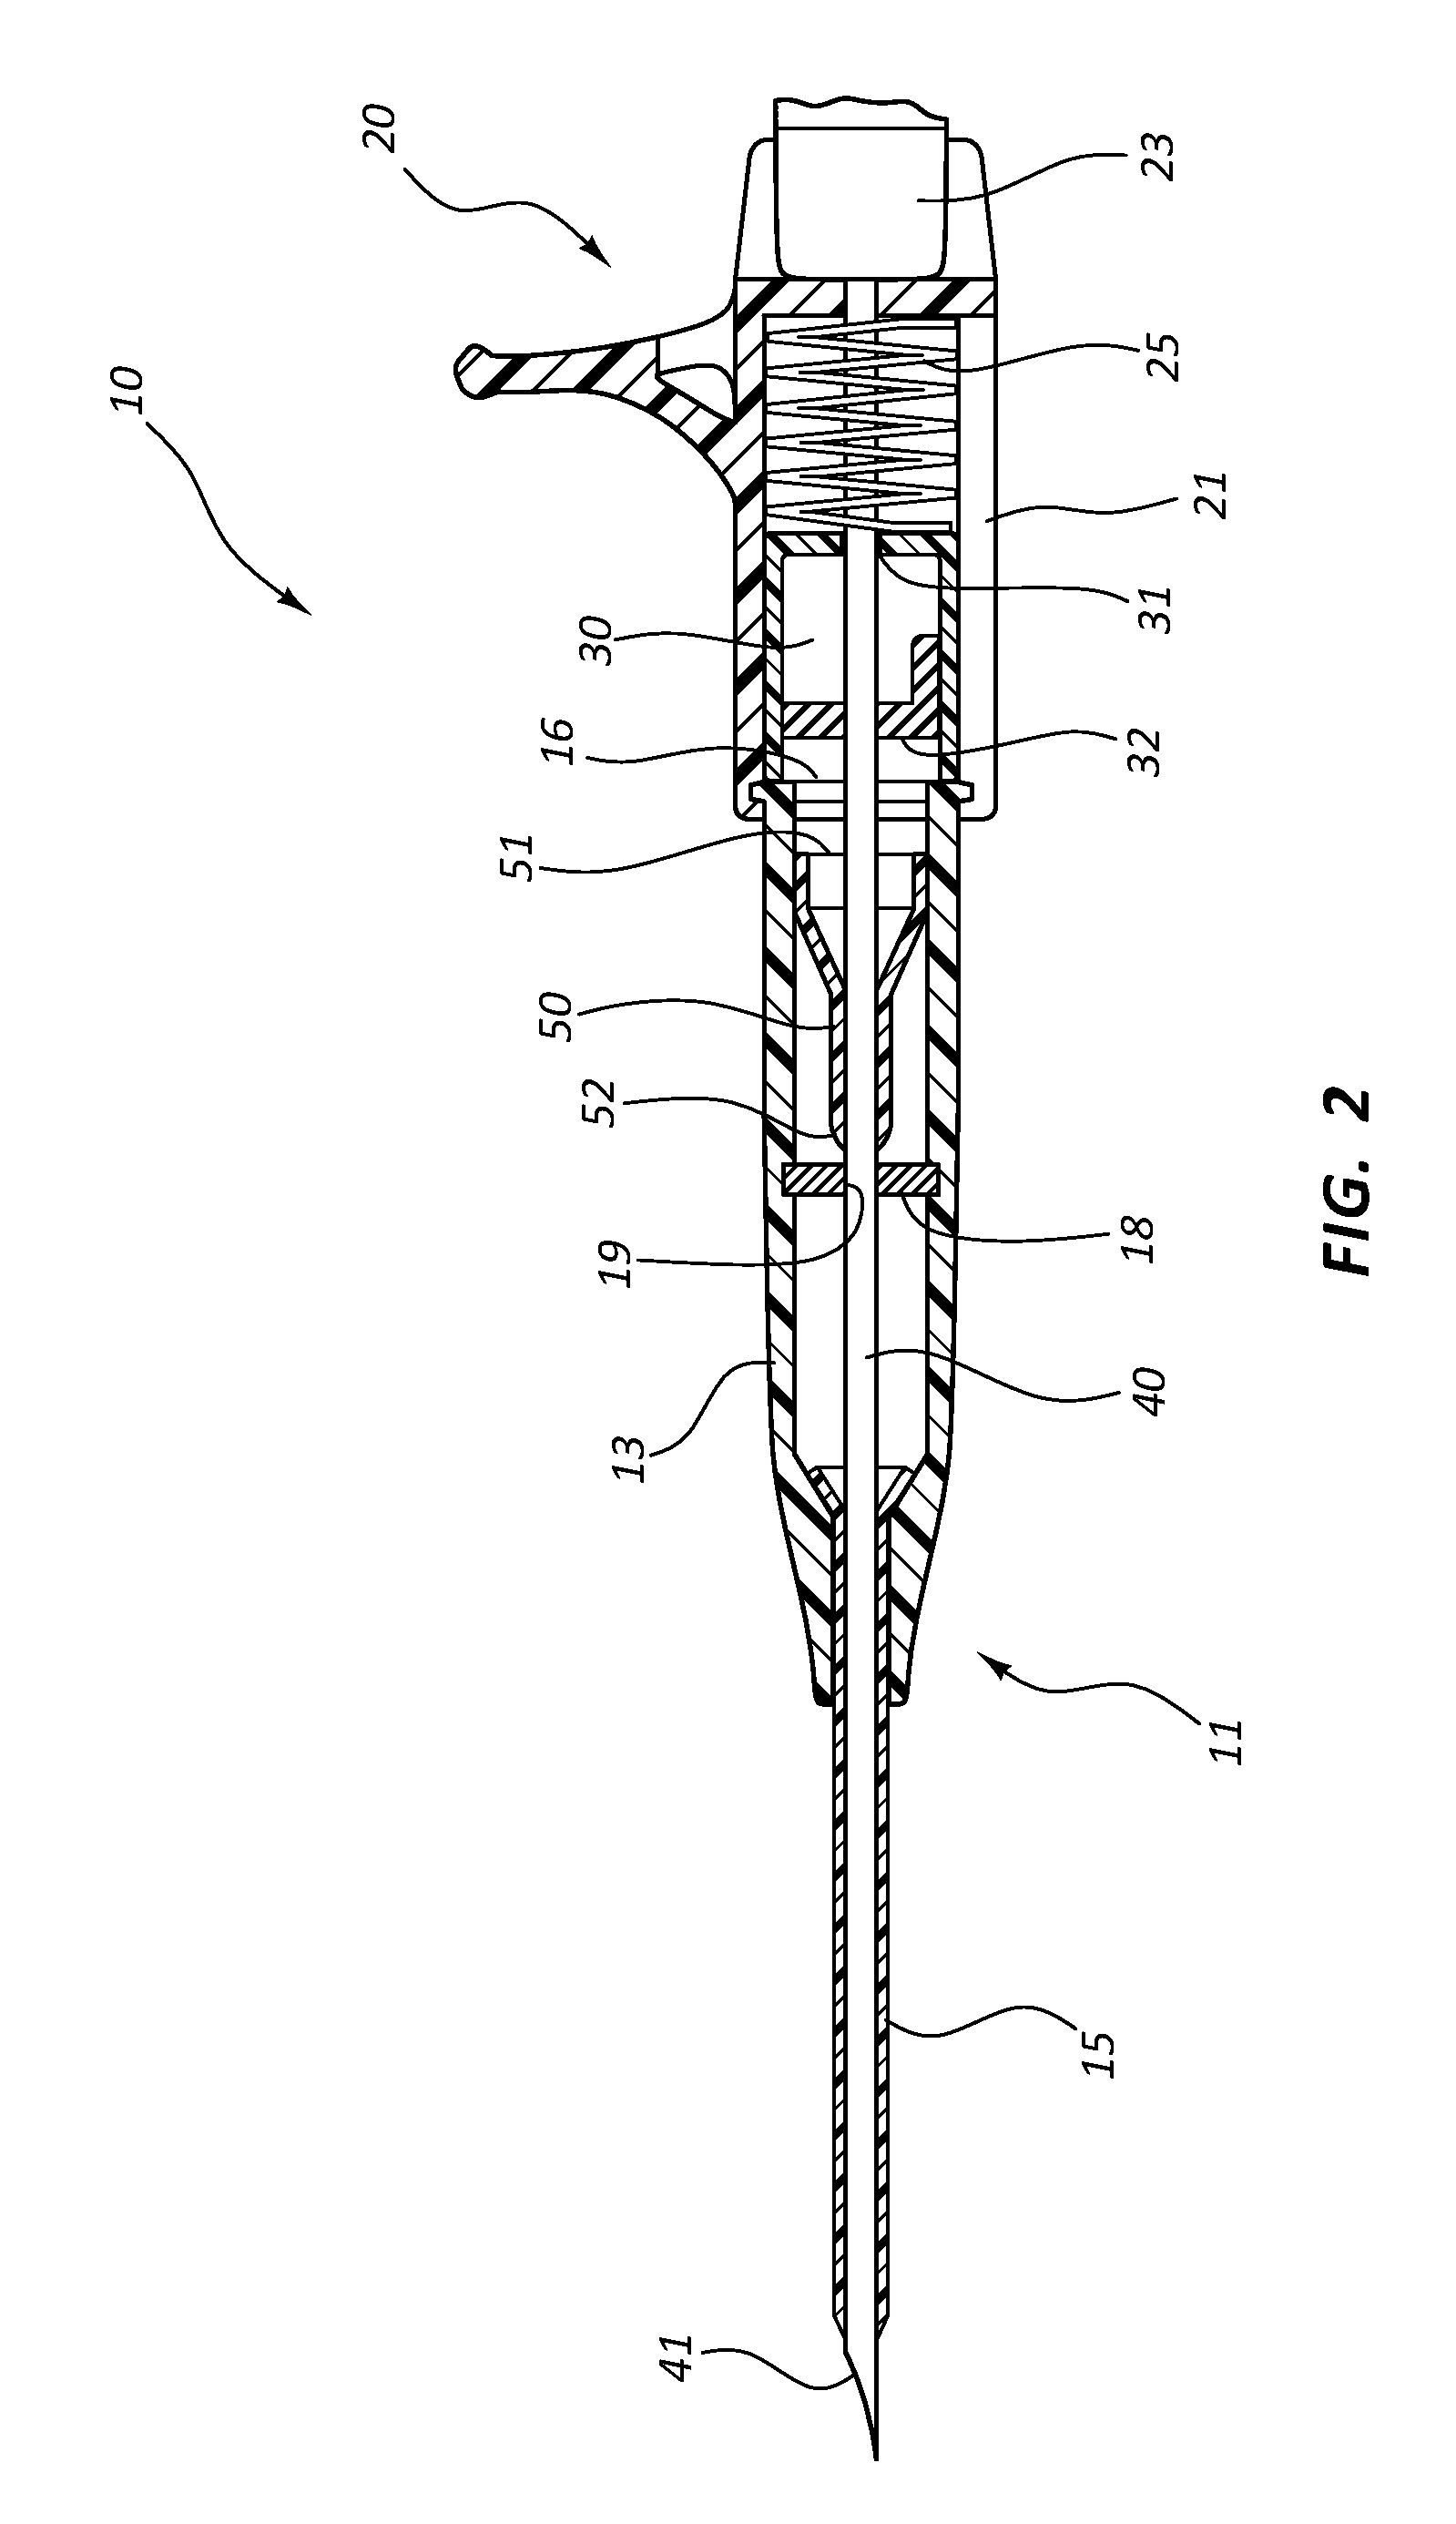 Ported iv catheter having external needle shield and internal blood control septum